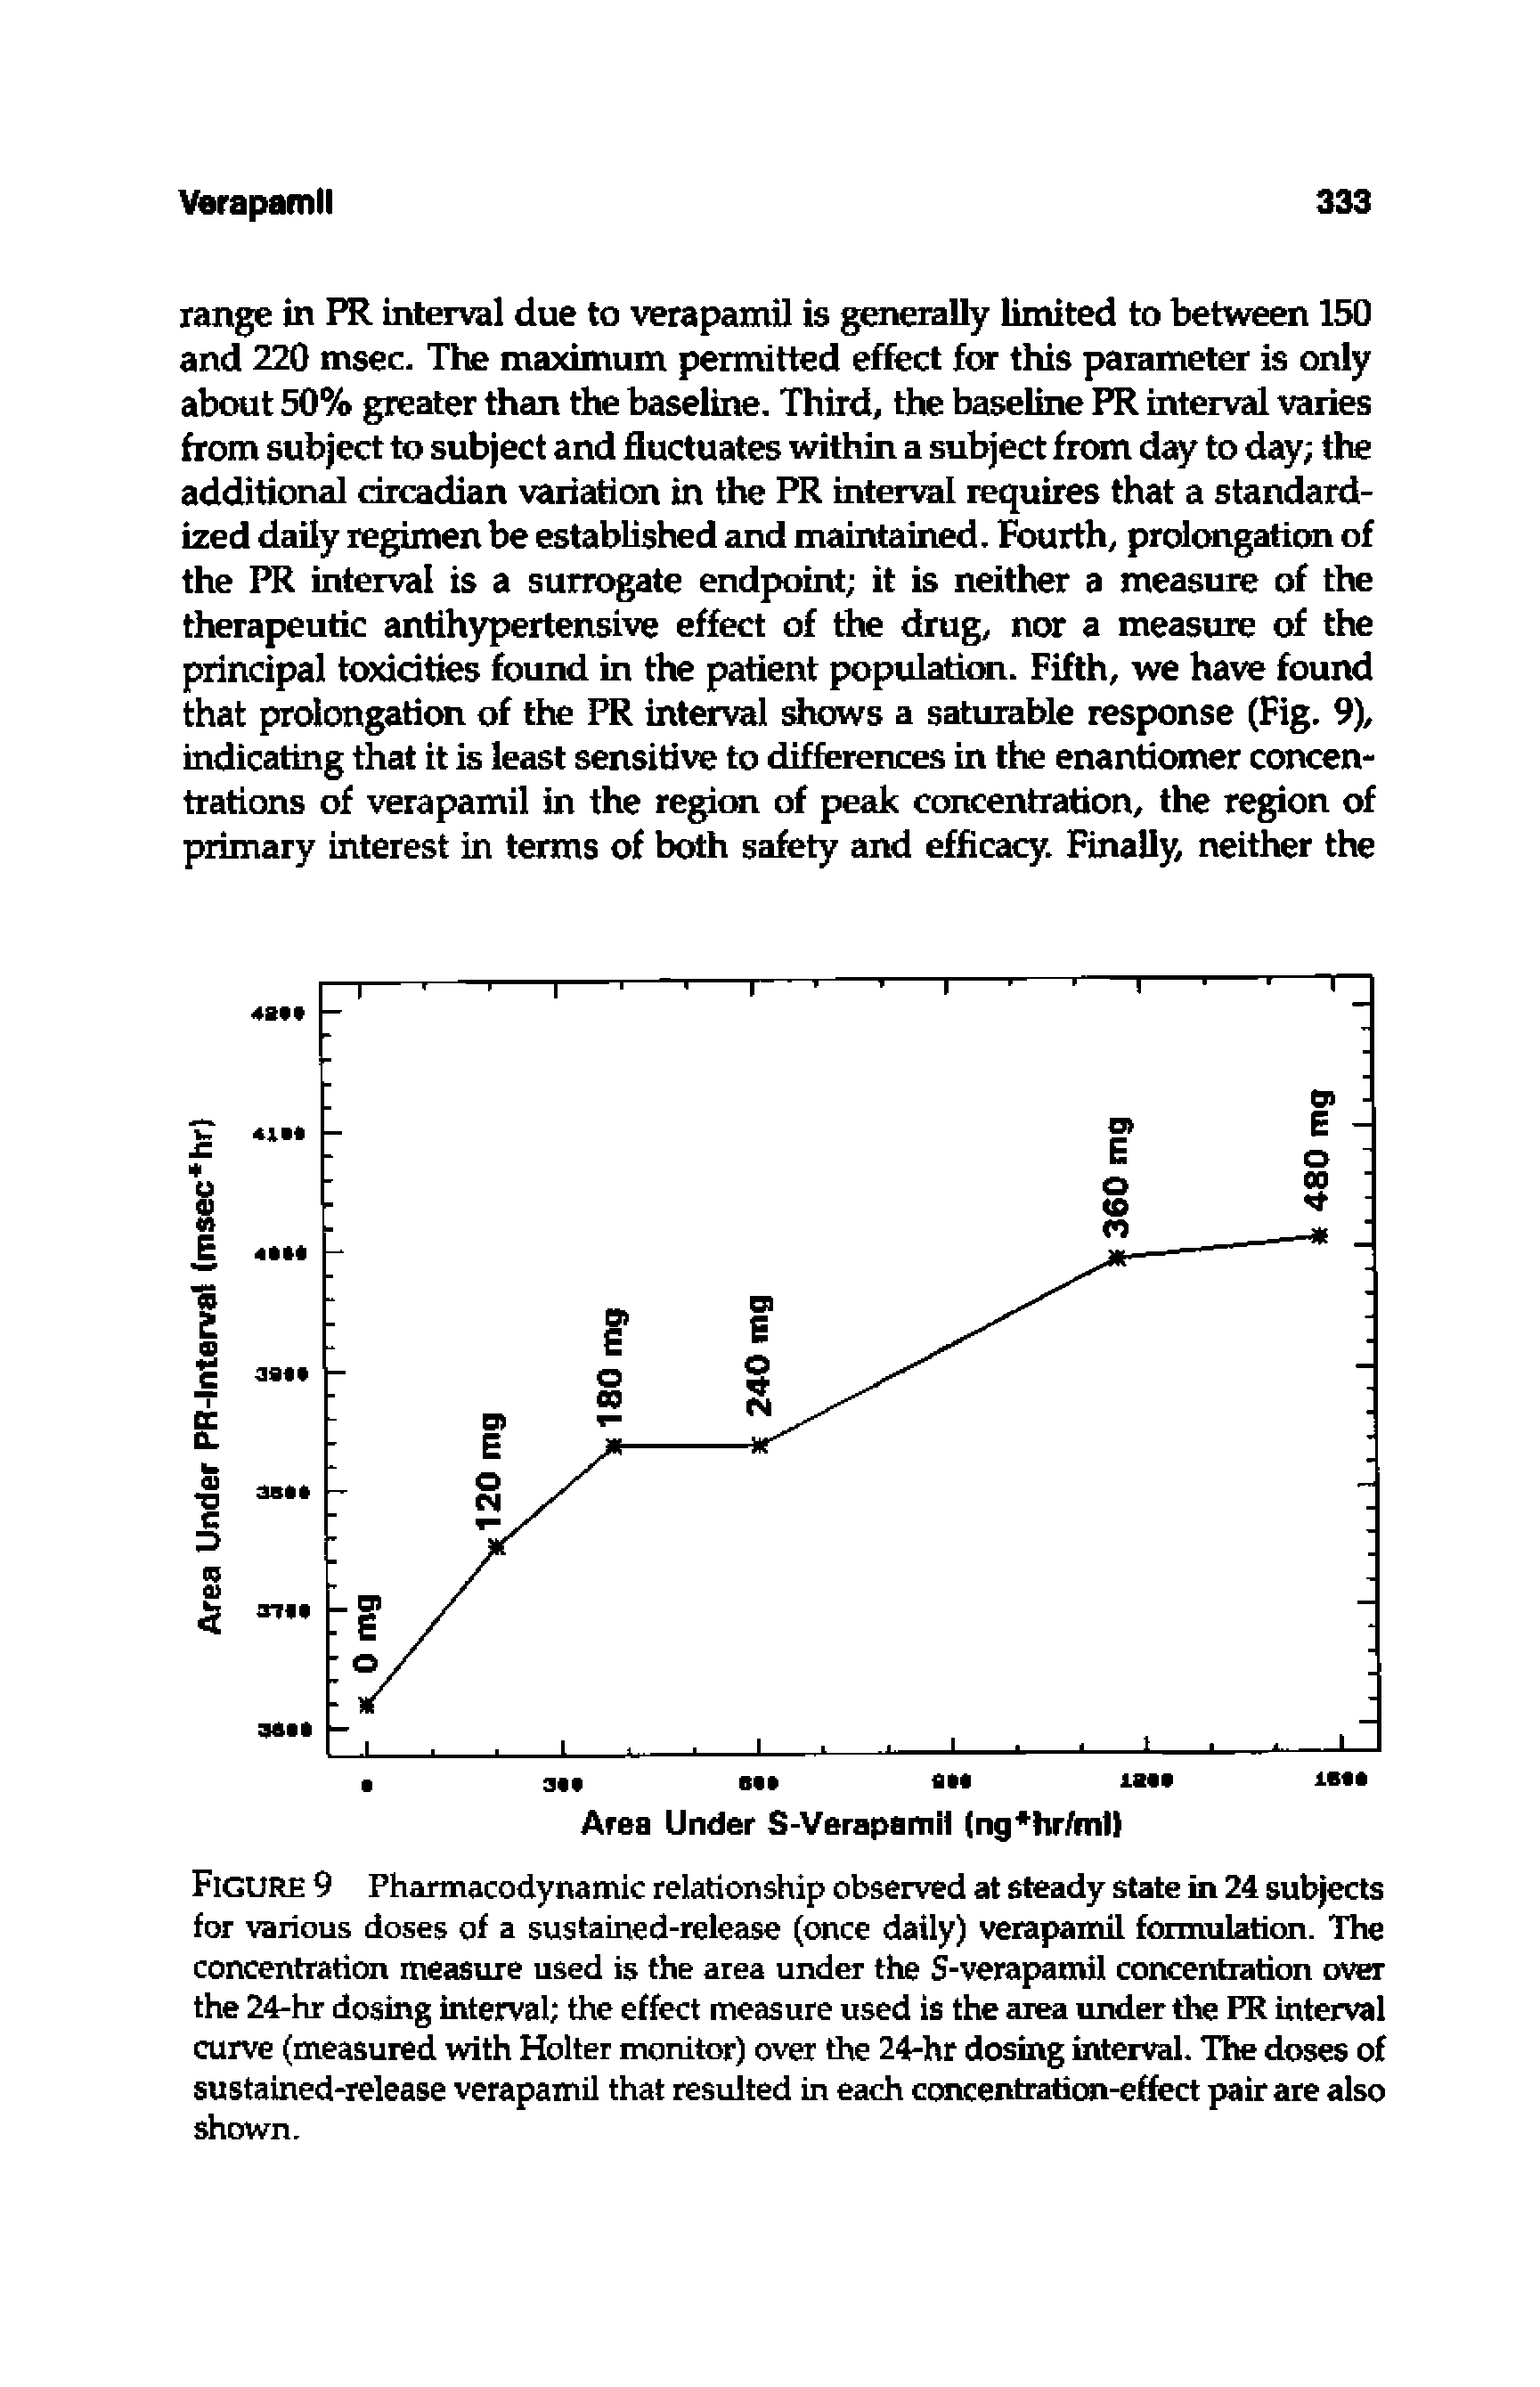 Figure 9 Pharmacodynamic relationship observed at steady state in 24 subjects for various doses of a sustained-release (once daily) verapamil formulation. The concentration measure used is the area under the S-verapamil concentration over the 24-hr dosing interval the effect measure used is the area under the PR interval curve (measured with Holter monitor) over the 24-hr dosing interval. The doses of sustained-release verapamil that resulted in each concentration-effect pair are also shown.